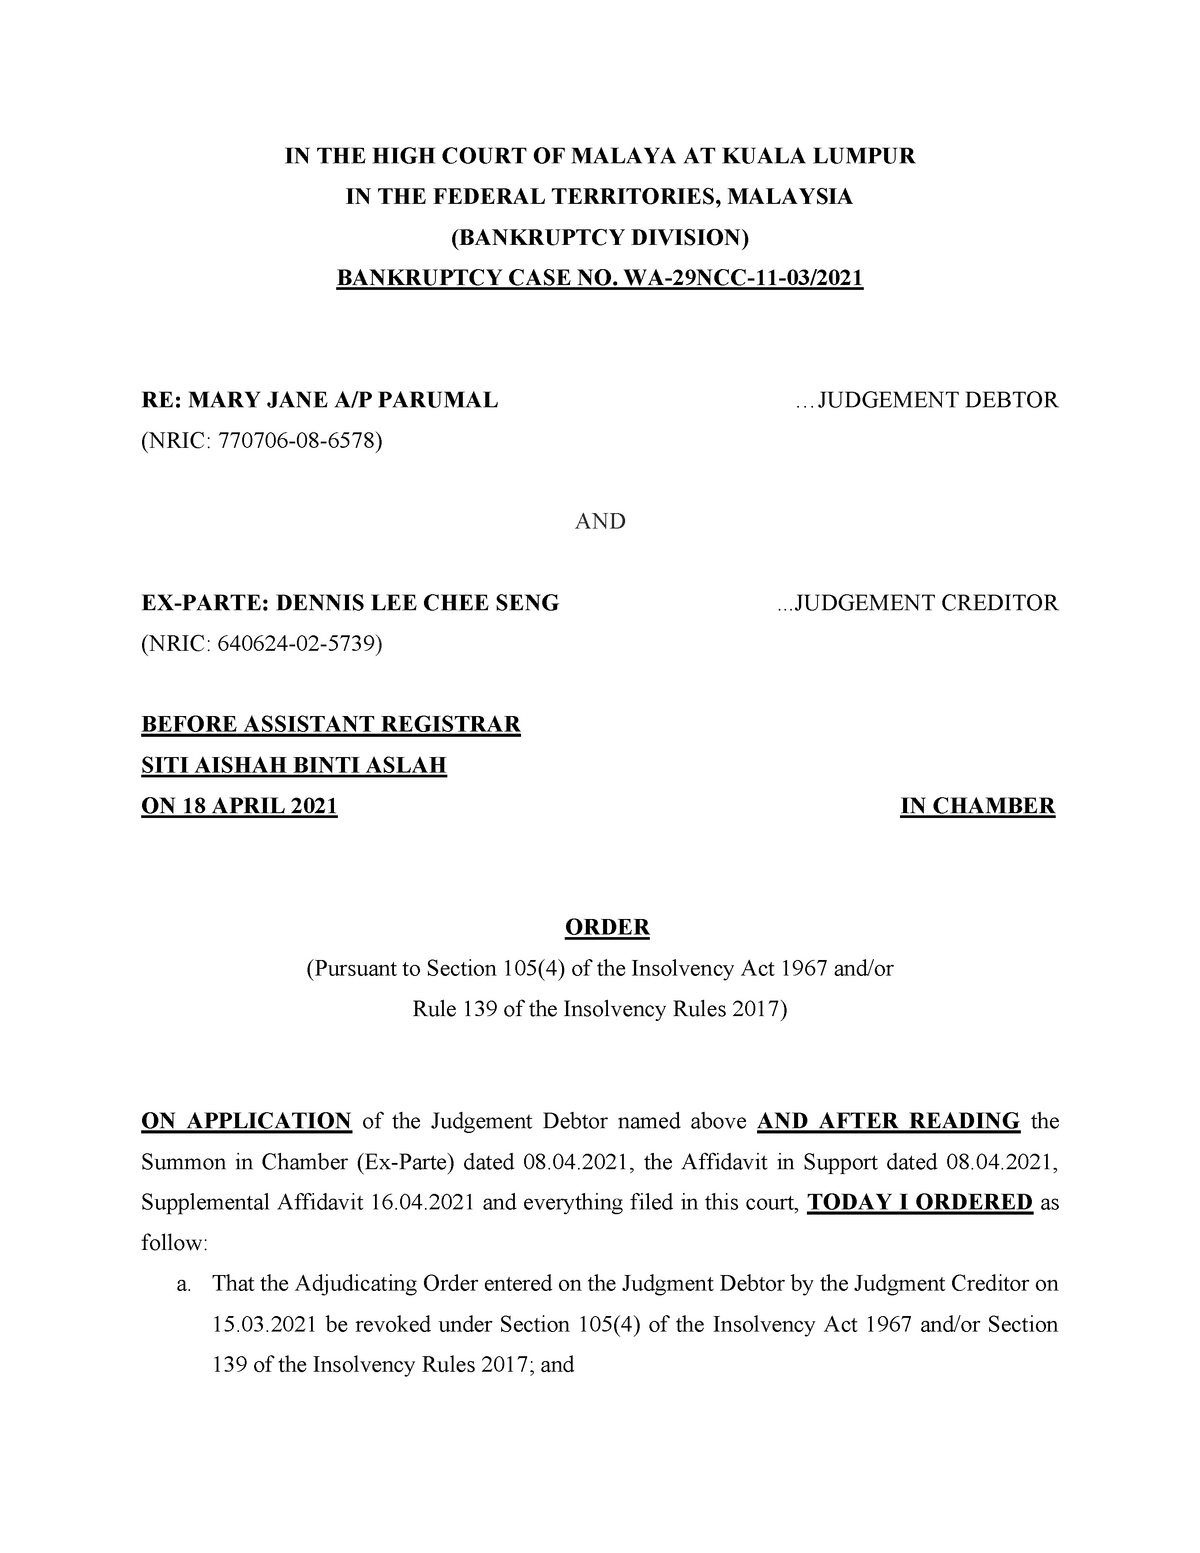 example-of-court-order-in-term-cause-paper-in-the-high-court-of